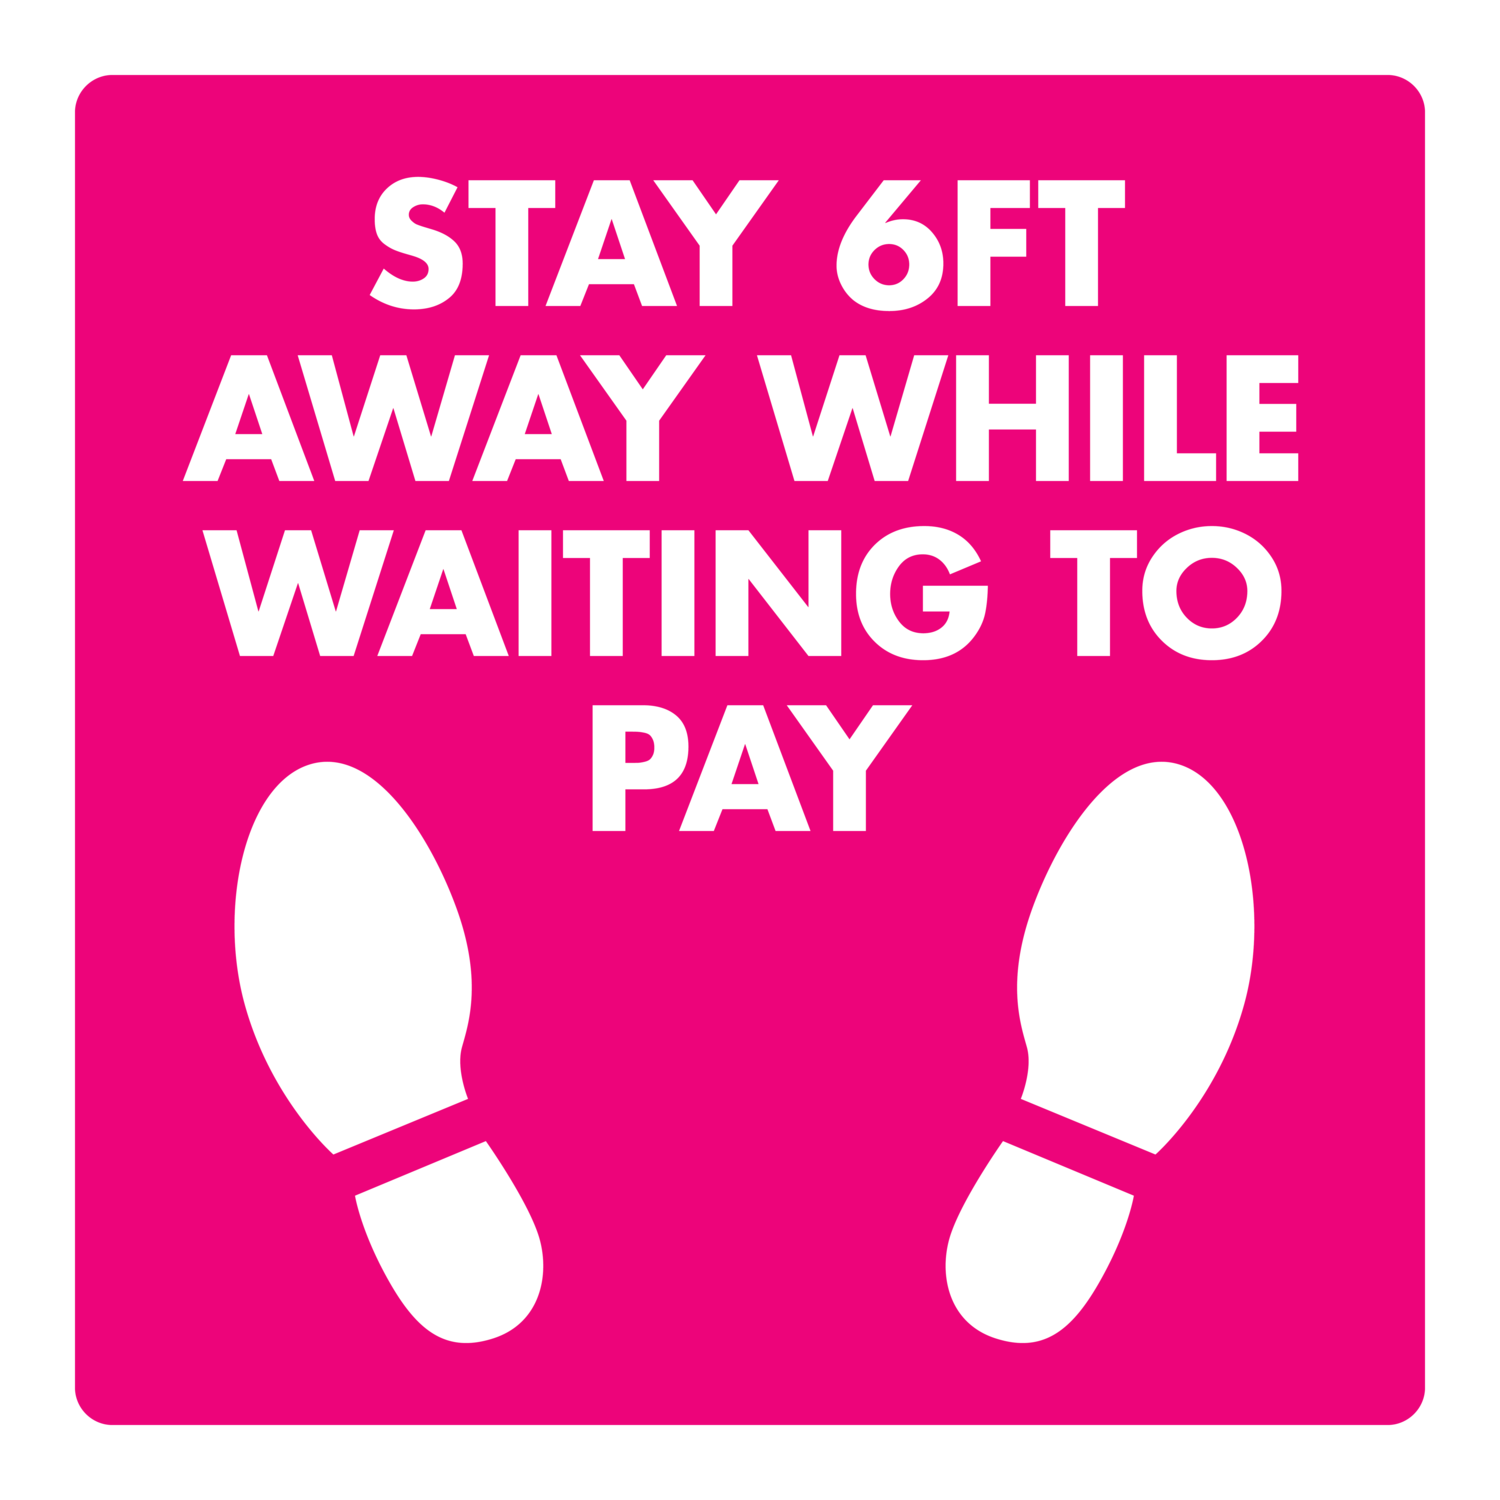 Wait to Pay Notice - Social Distance Square (Pack of 6)